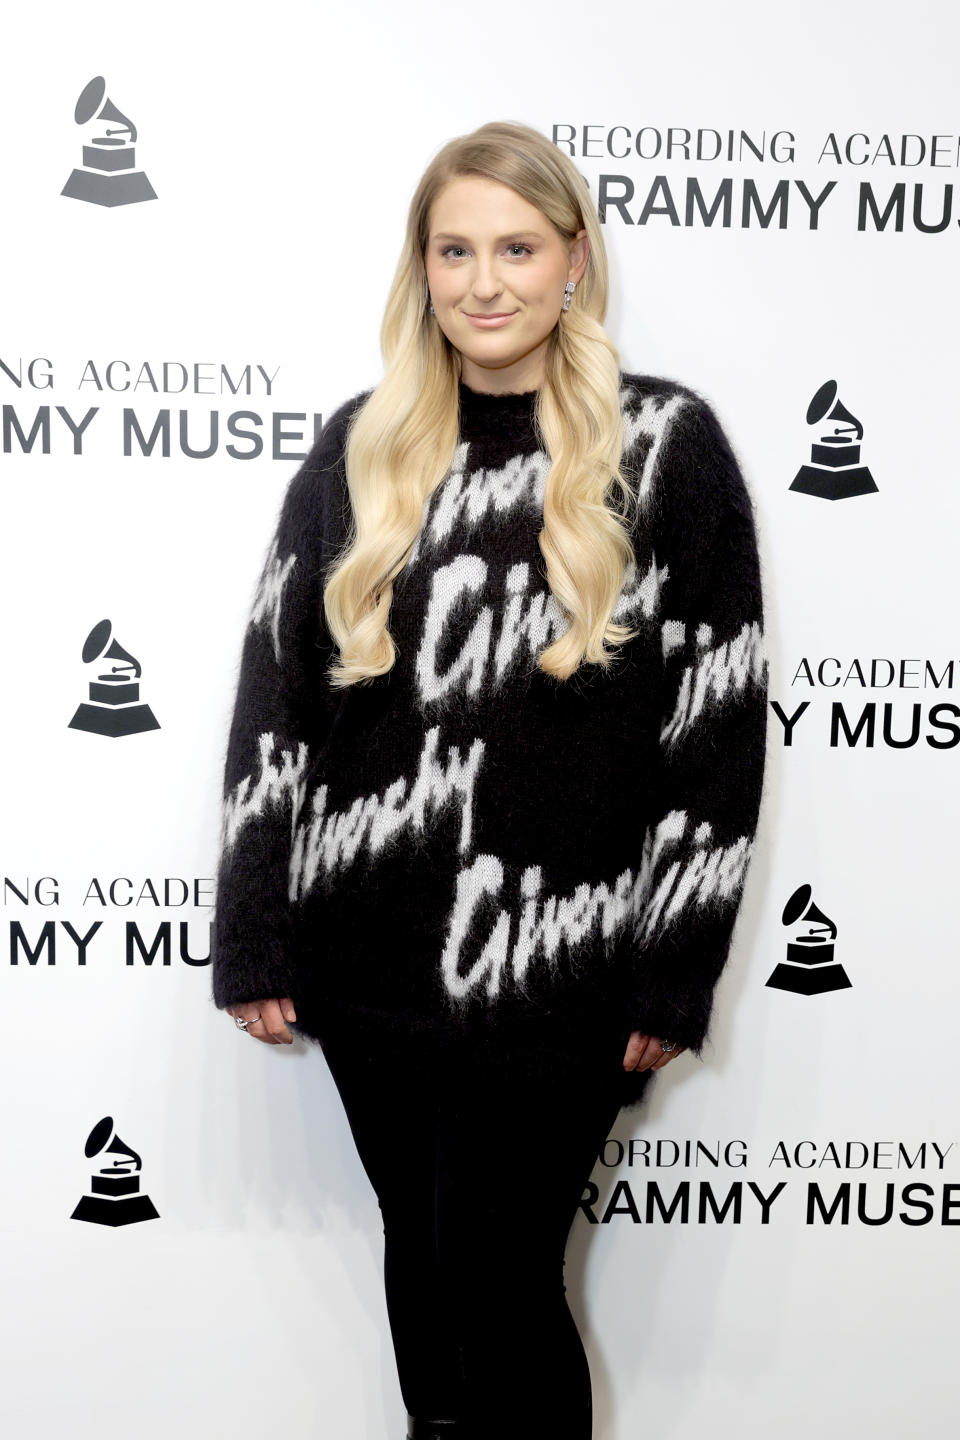 LOS ANGELES, CALIFORNIA - NOVEMBER 08: Meghan Trainor attends Spotlight: Meghan Trainor at The GRAMMY Museum on November 08, 2023 in Los Angeles, California. (Photo by Rebecca Sapp/Getty Images for The Recording Academy)